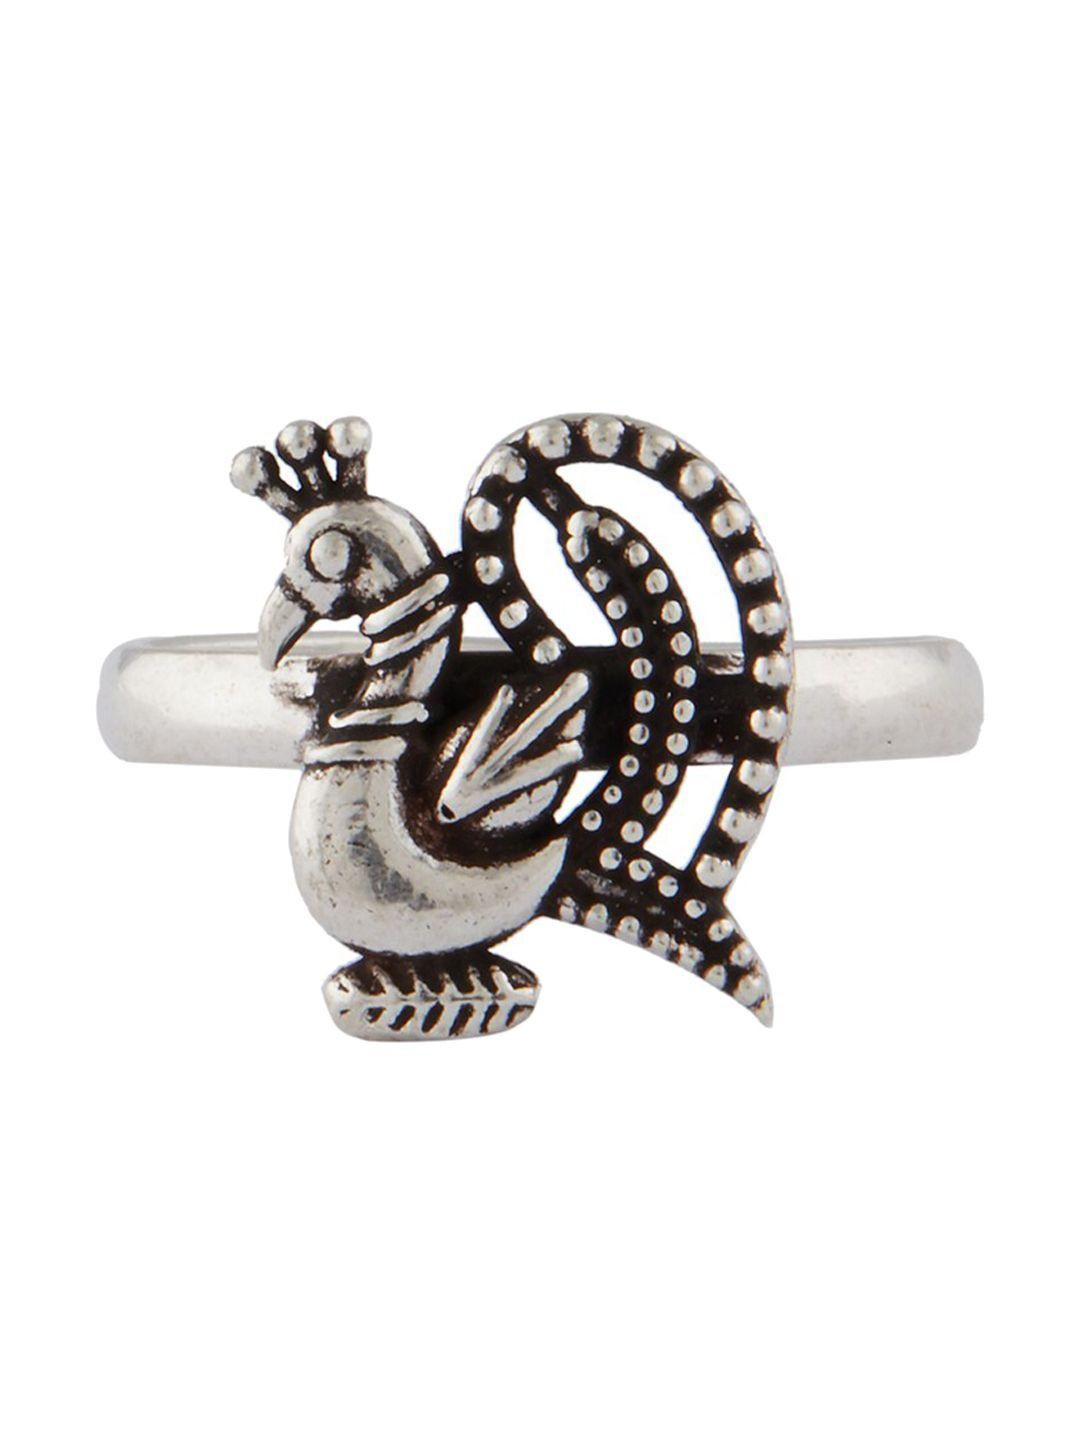 ahilya 92.5 sterling silver-plated peacock shaped toe ring